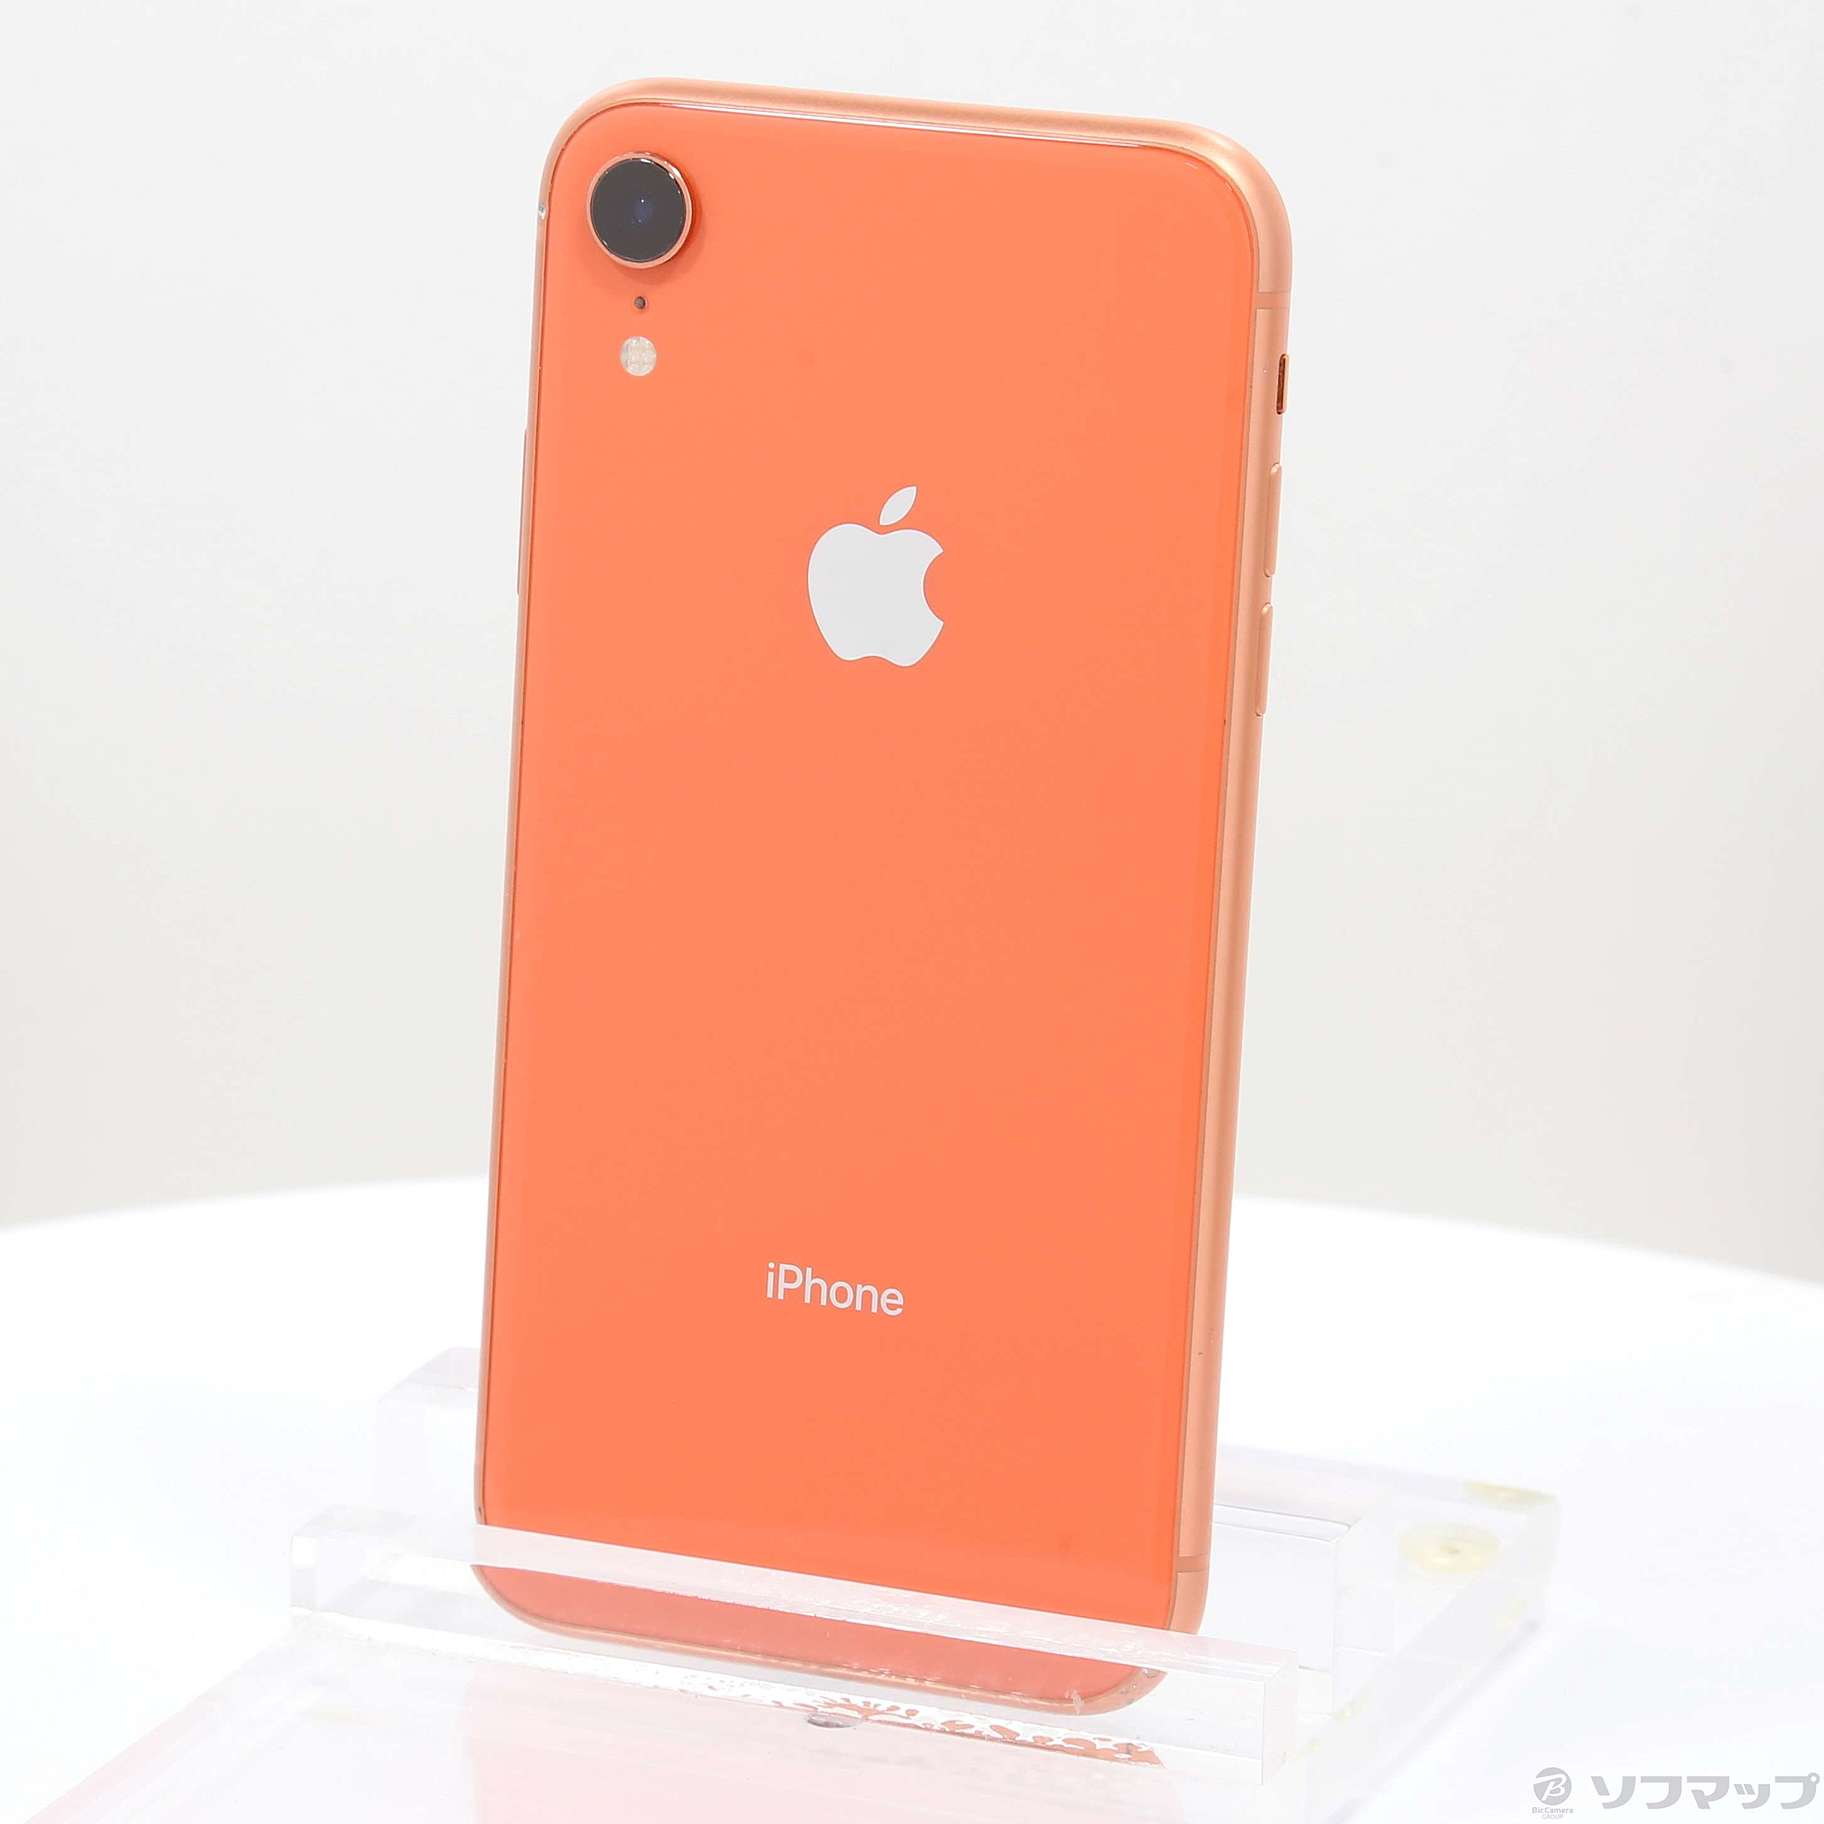 iPhone XR Coral 256 GB SIMフリー | camillevieraservices.com